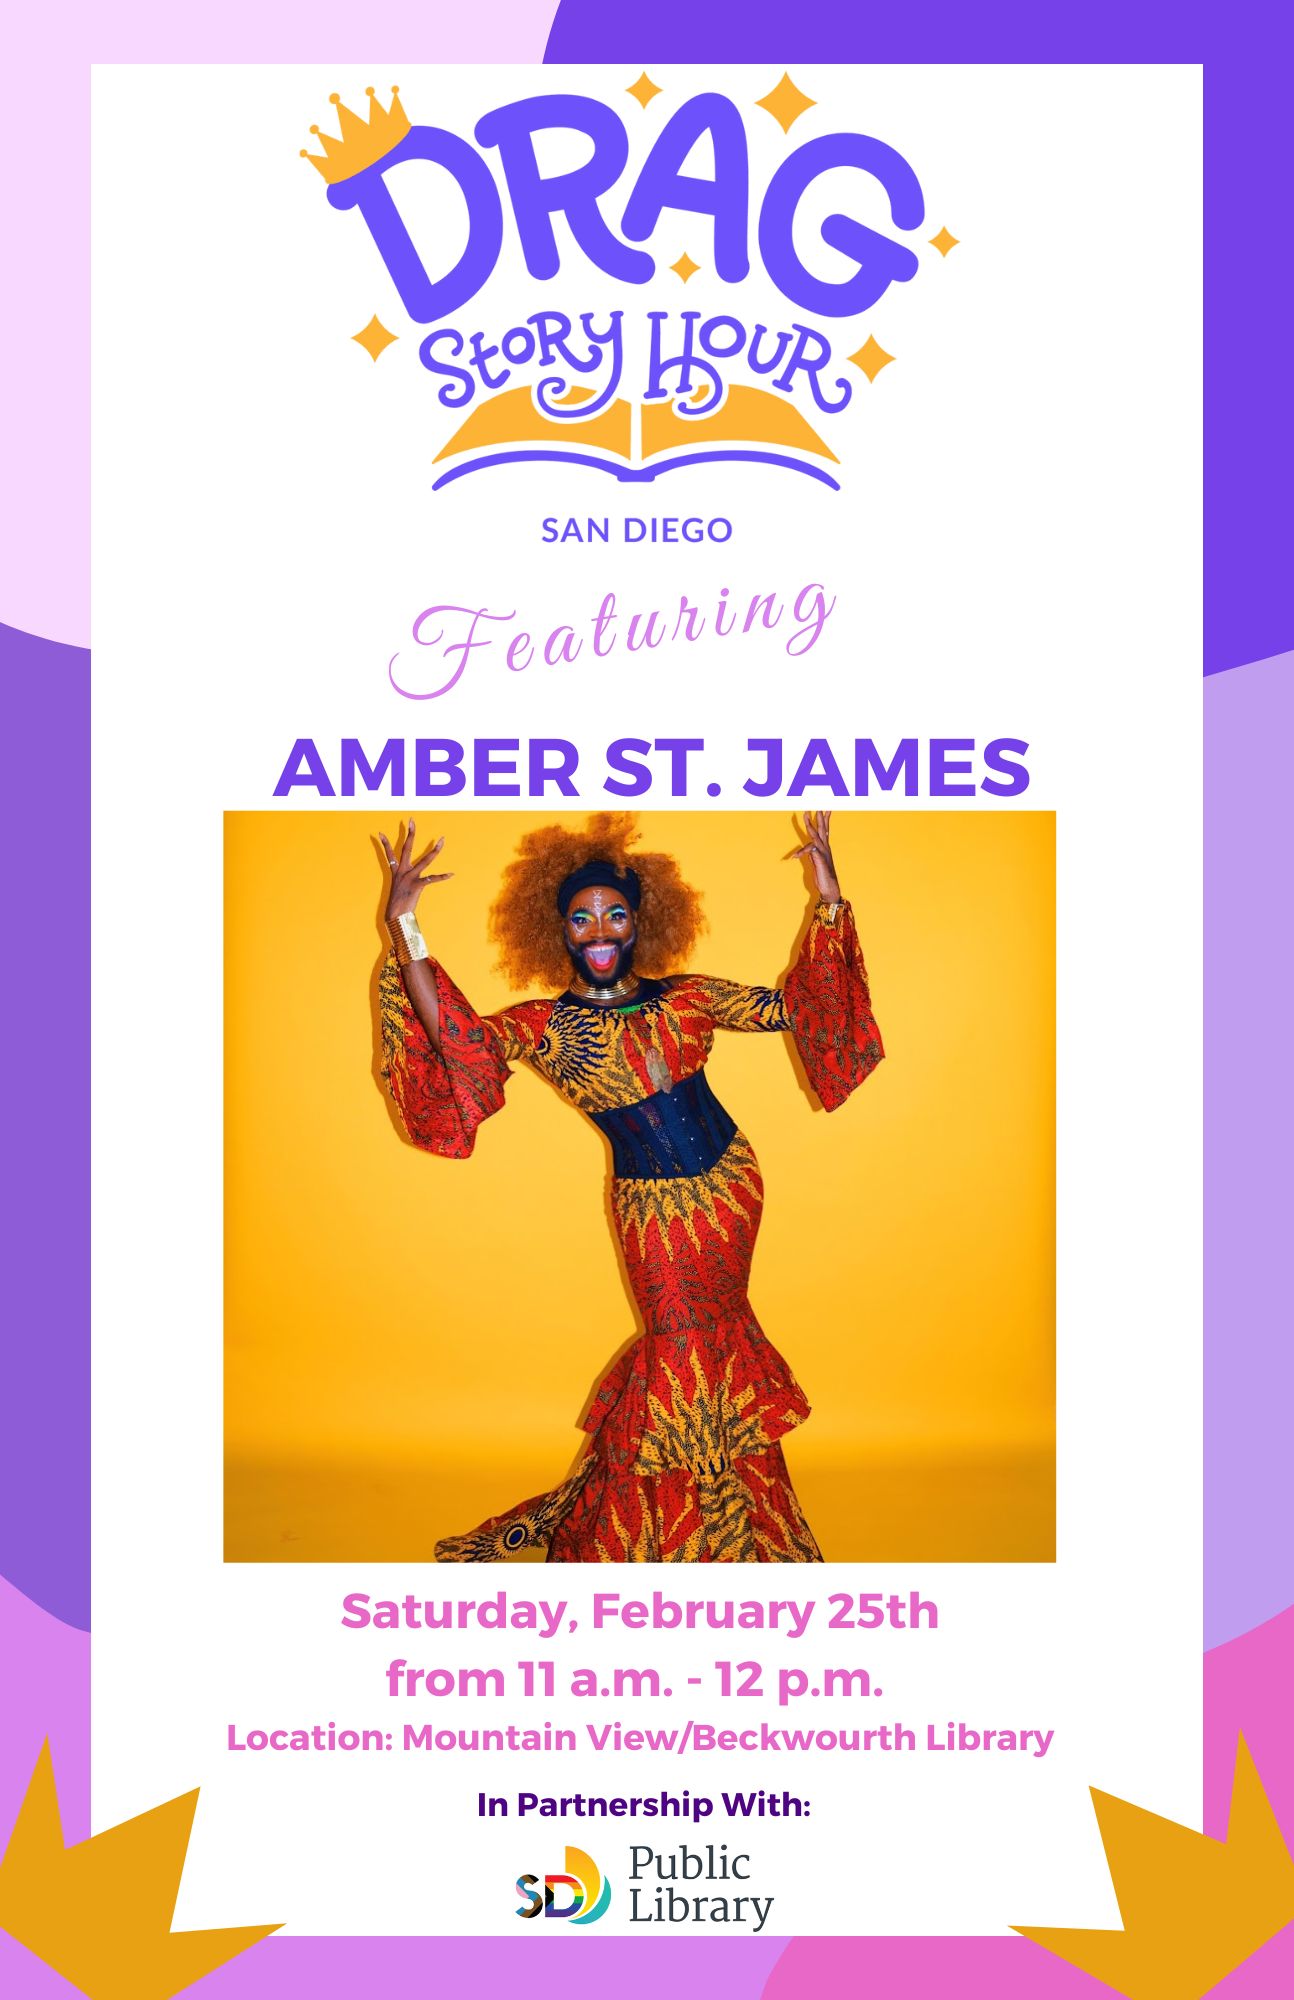 Flyer image on a white background a dark/light purple background for Drag Queen Story Hour San Diego. In the middle, a performer is sanding against a yellow background. She has her hands up in a pose and is wearing a long red dress with a pretty pattern and is smiling!